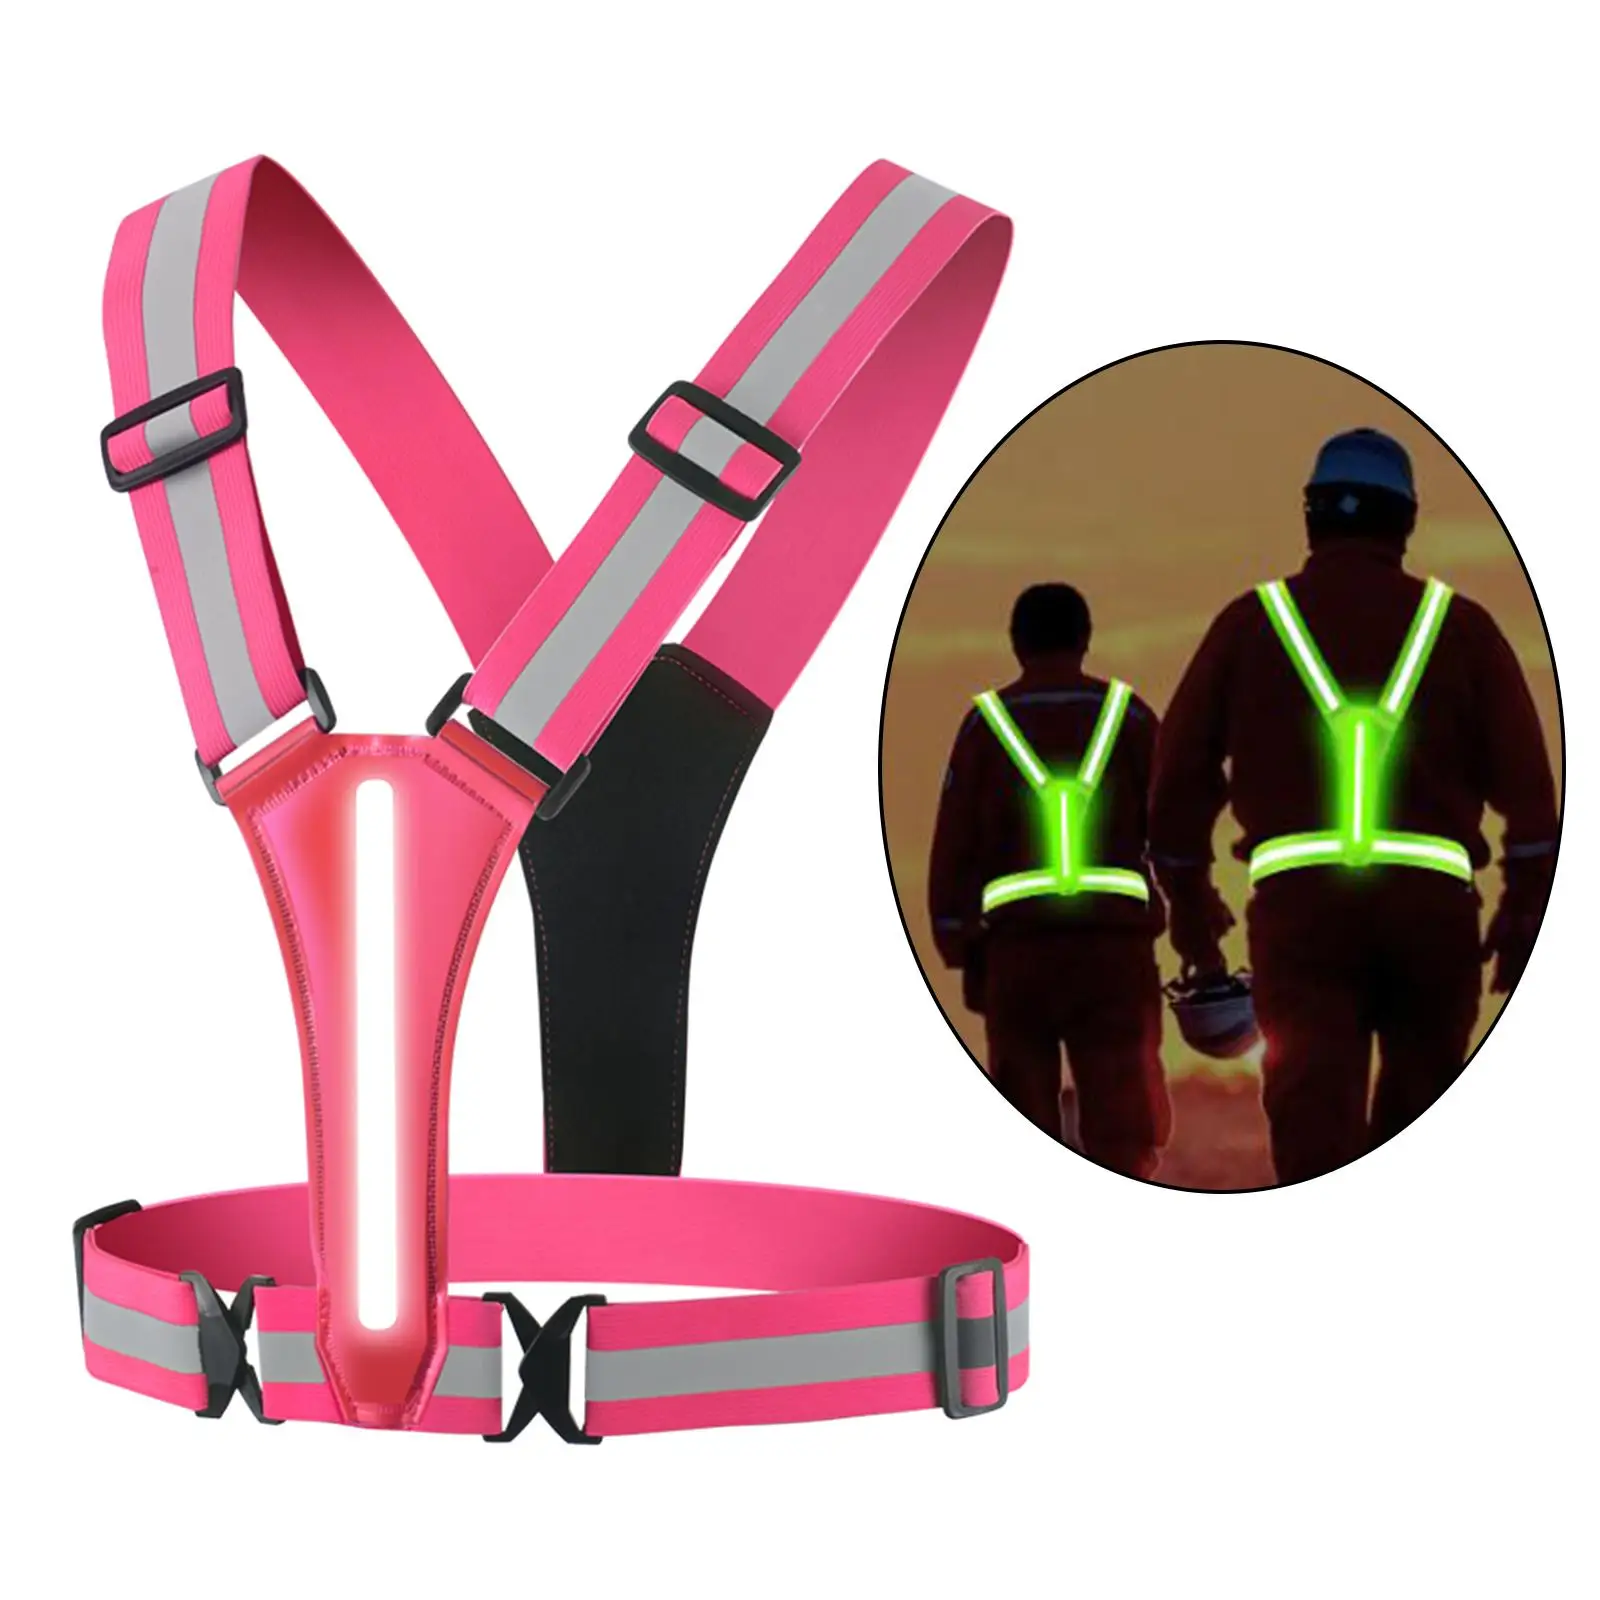 LED Reflective Vest Adjustable USB Rechargeable Long Distance Visible Running Gear for Night Walking Running Camping Men Women